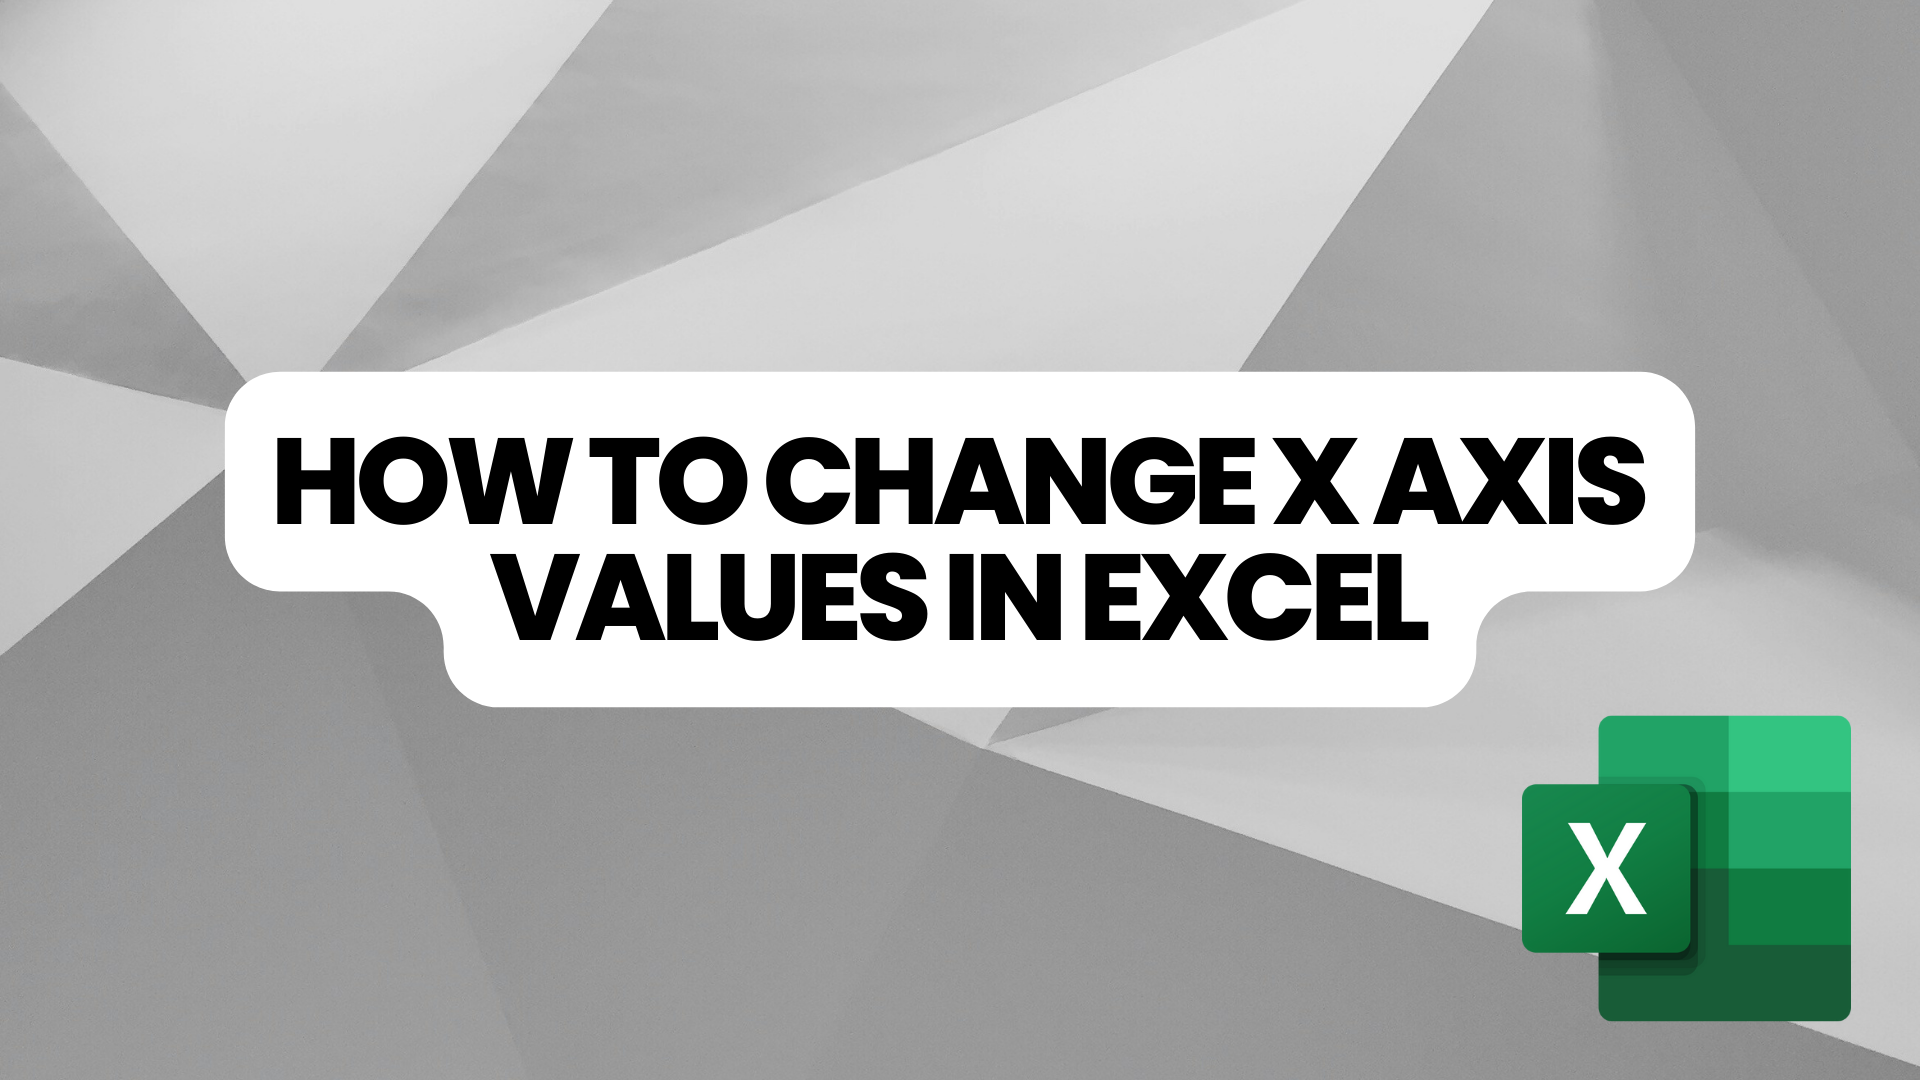 How to Change X Axis Values in Excel